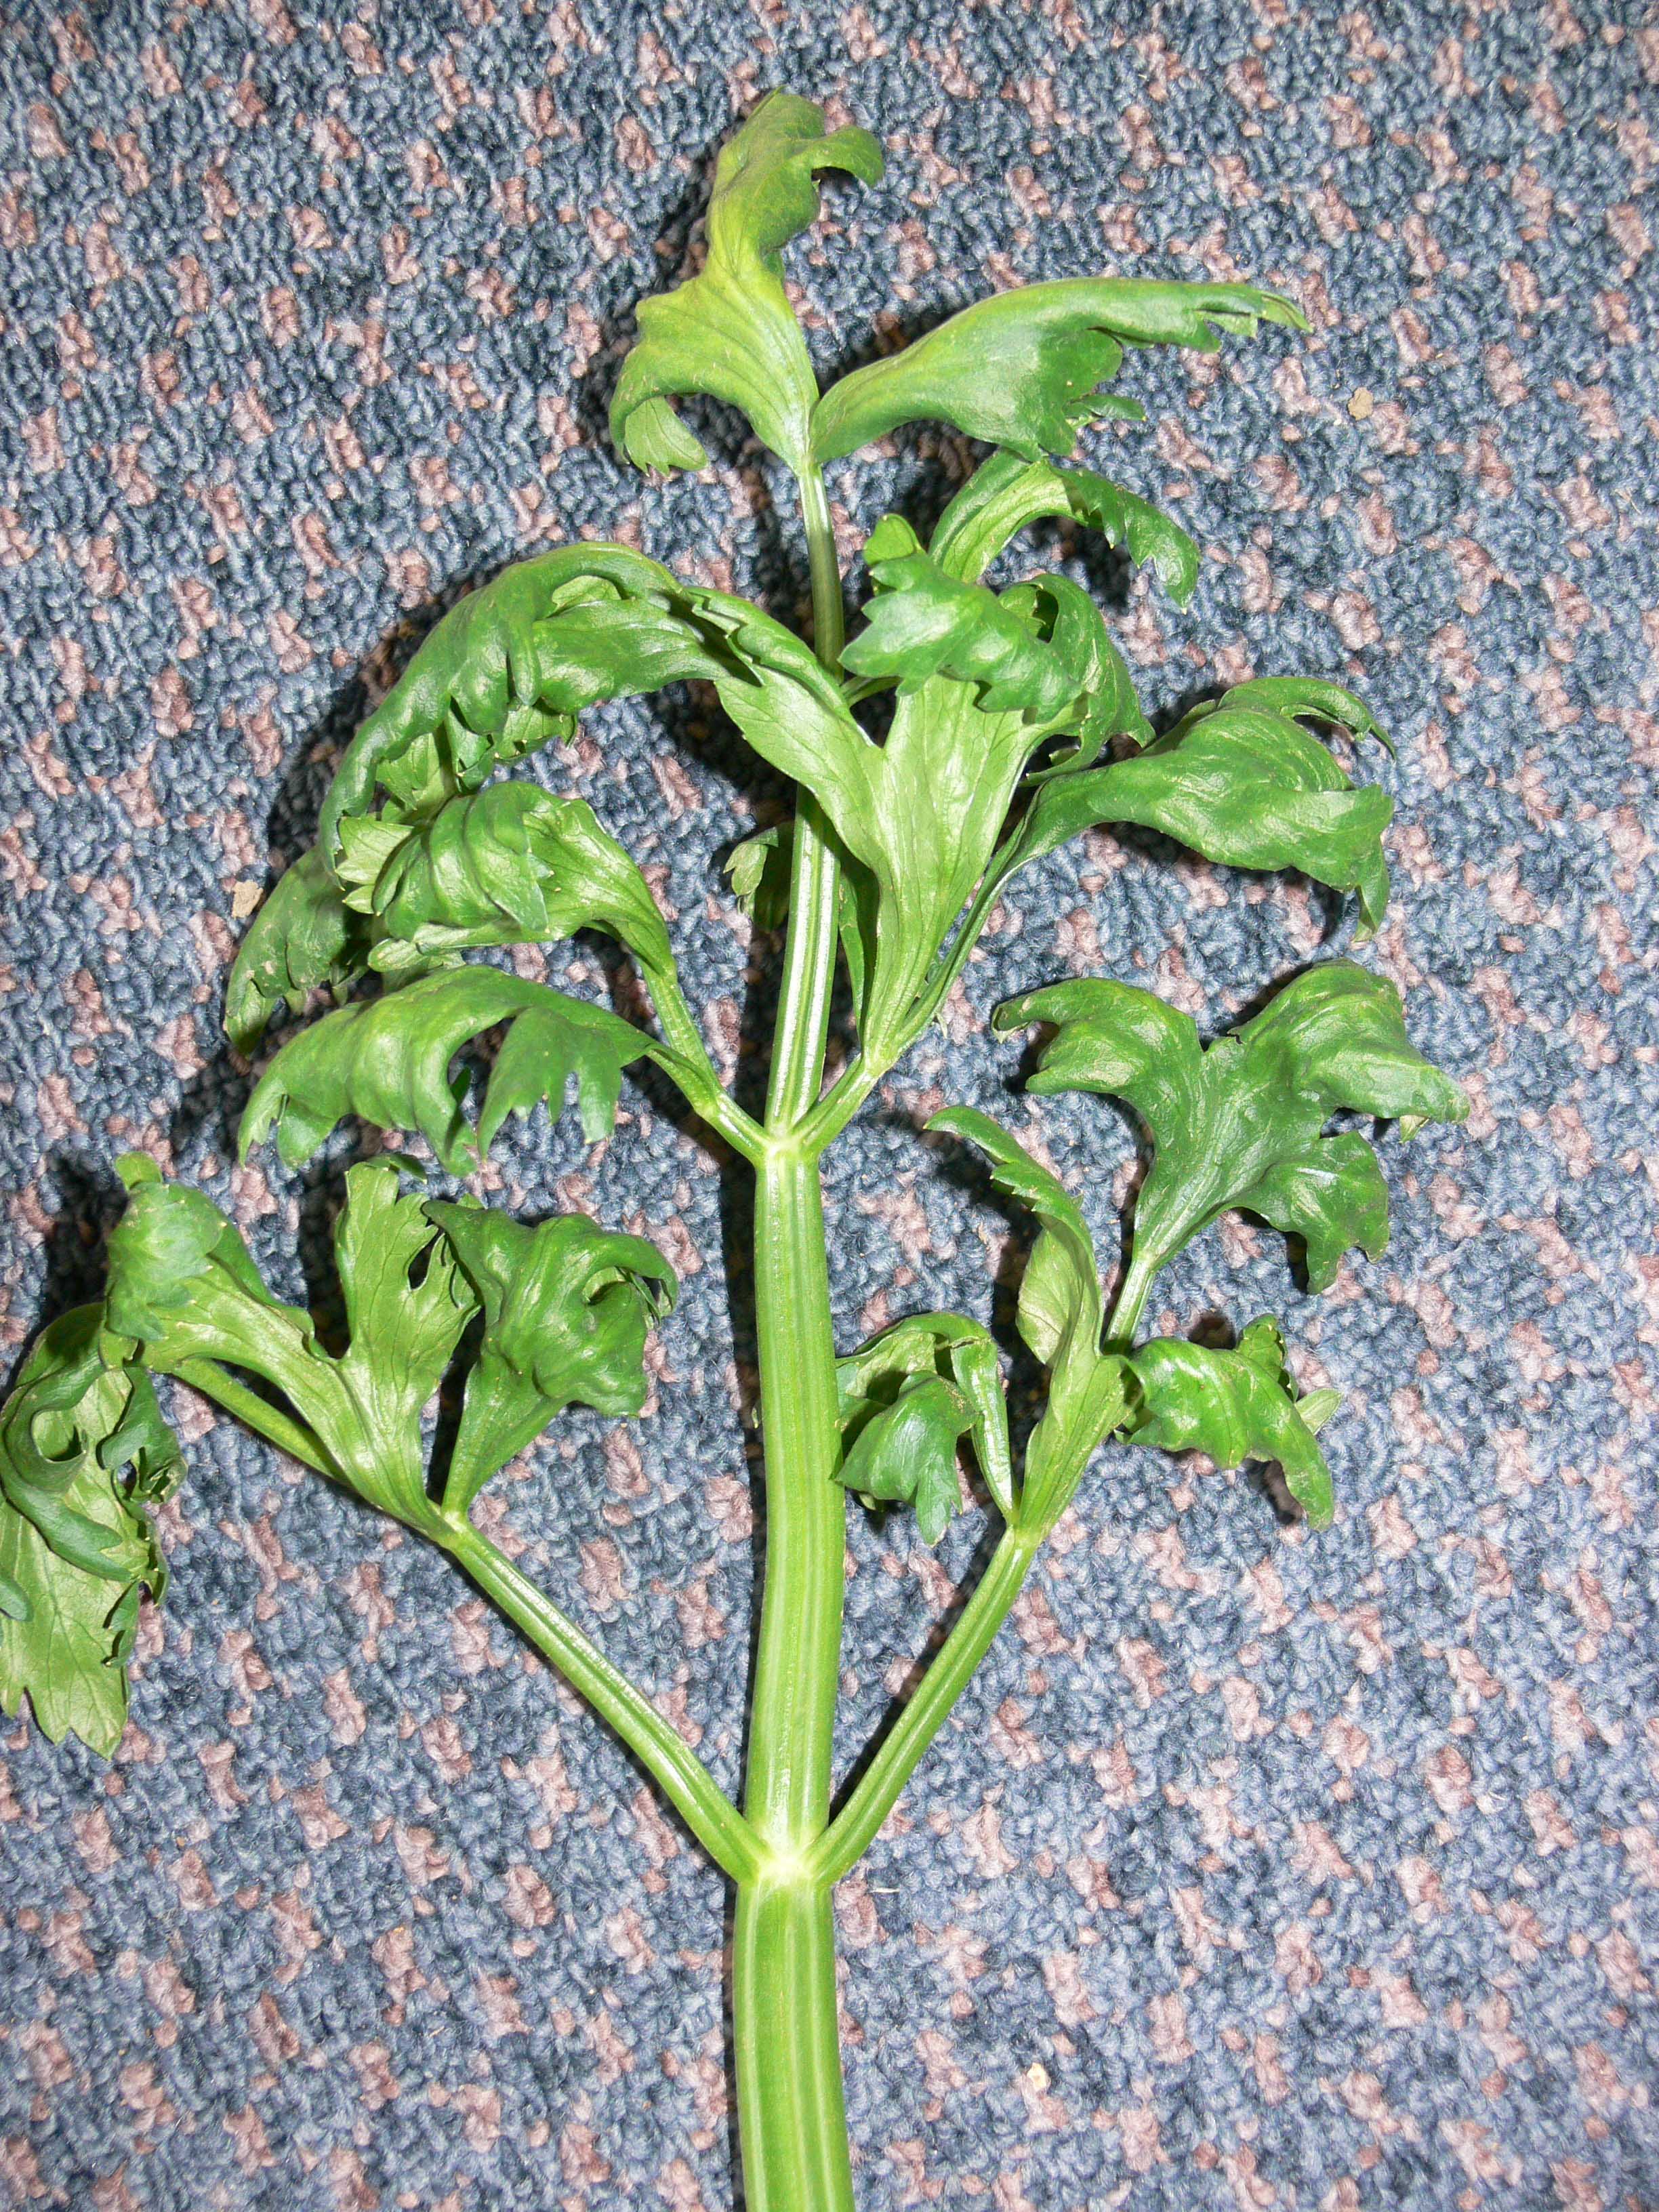 Single stalk of celery with curled leaves